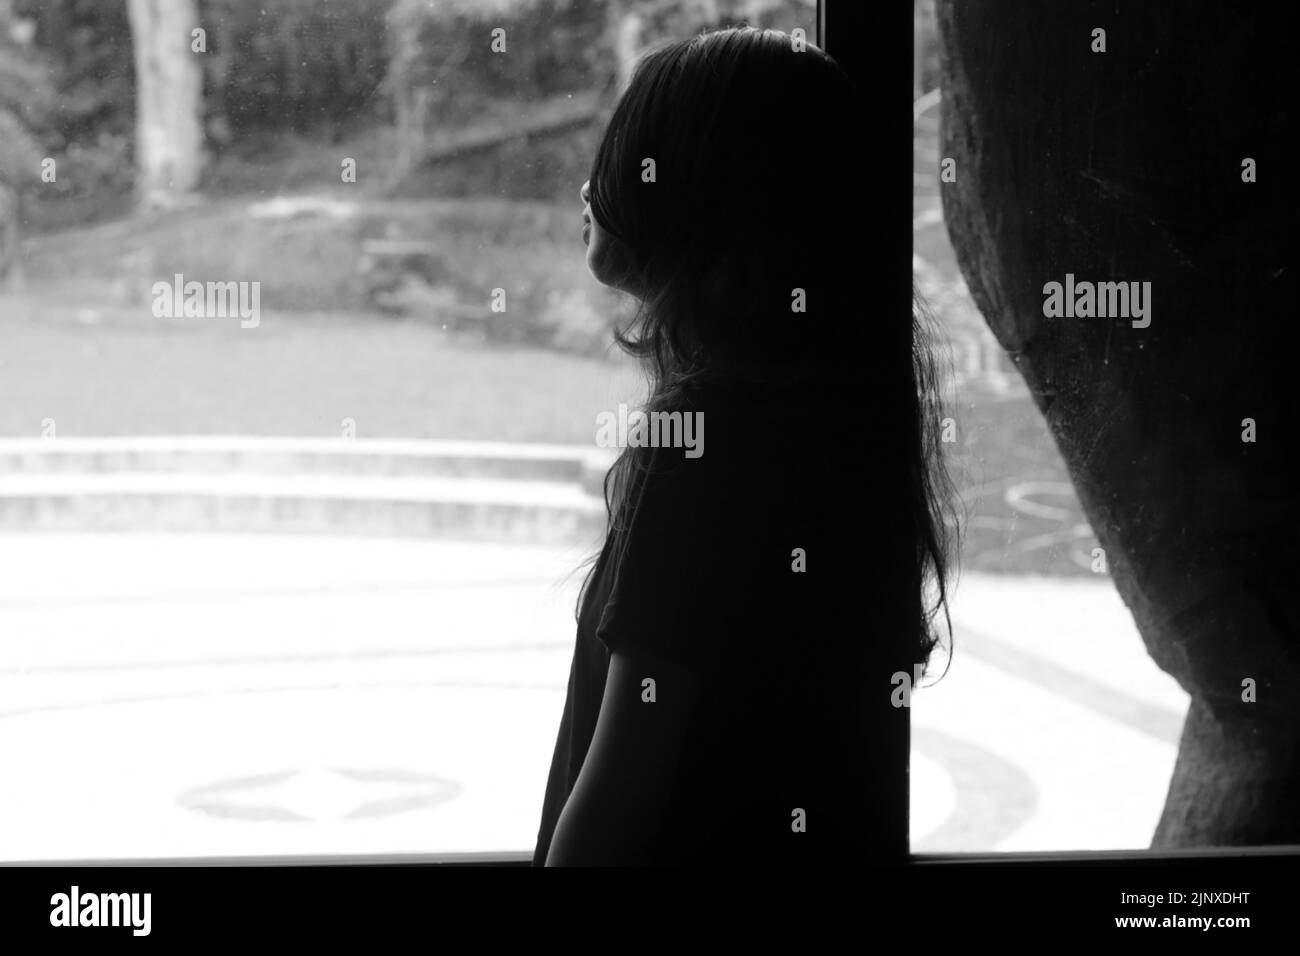 Silhouette of a girl with long hair, standing alone looking at the window day-dreaming thinking about life, deep in thought. In black and white. Stock Photo